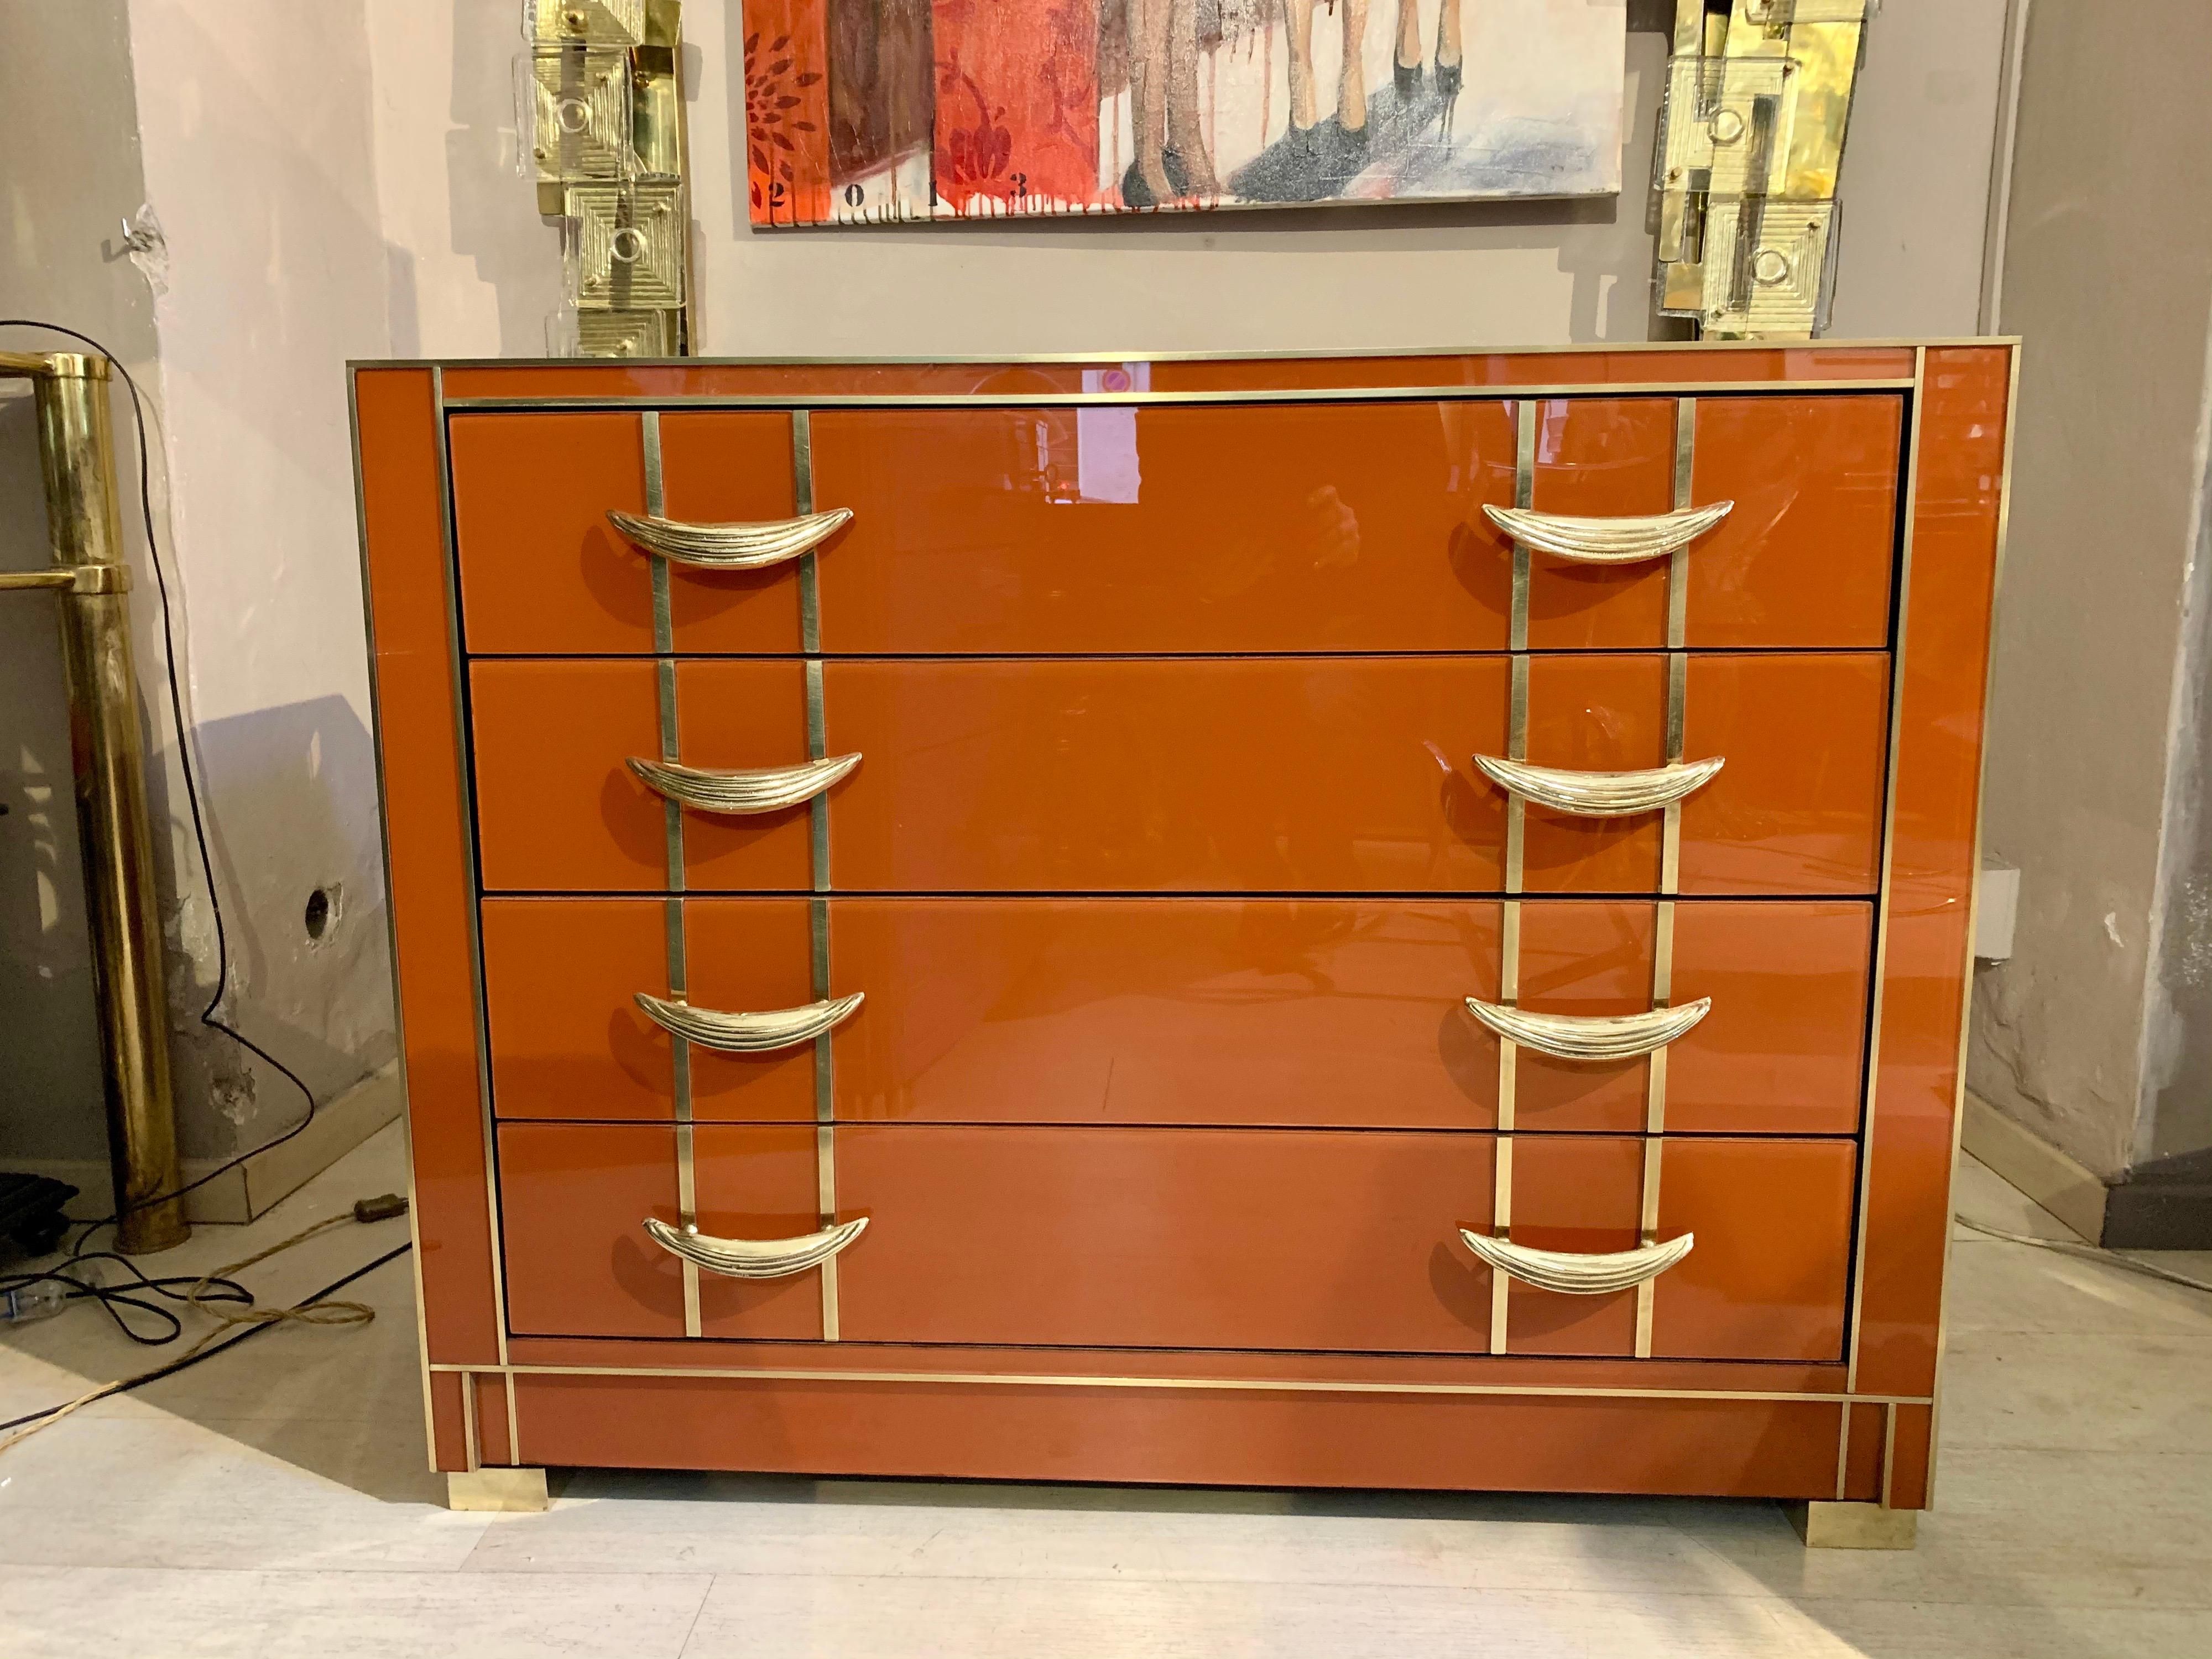 Italian orange opaline glass chest of drawers with handles and brass inlays, 4 drawers. Good vintage condition, this piece represents a solid high quality Italian manufacture from the last century.